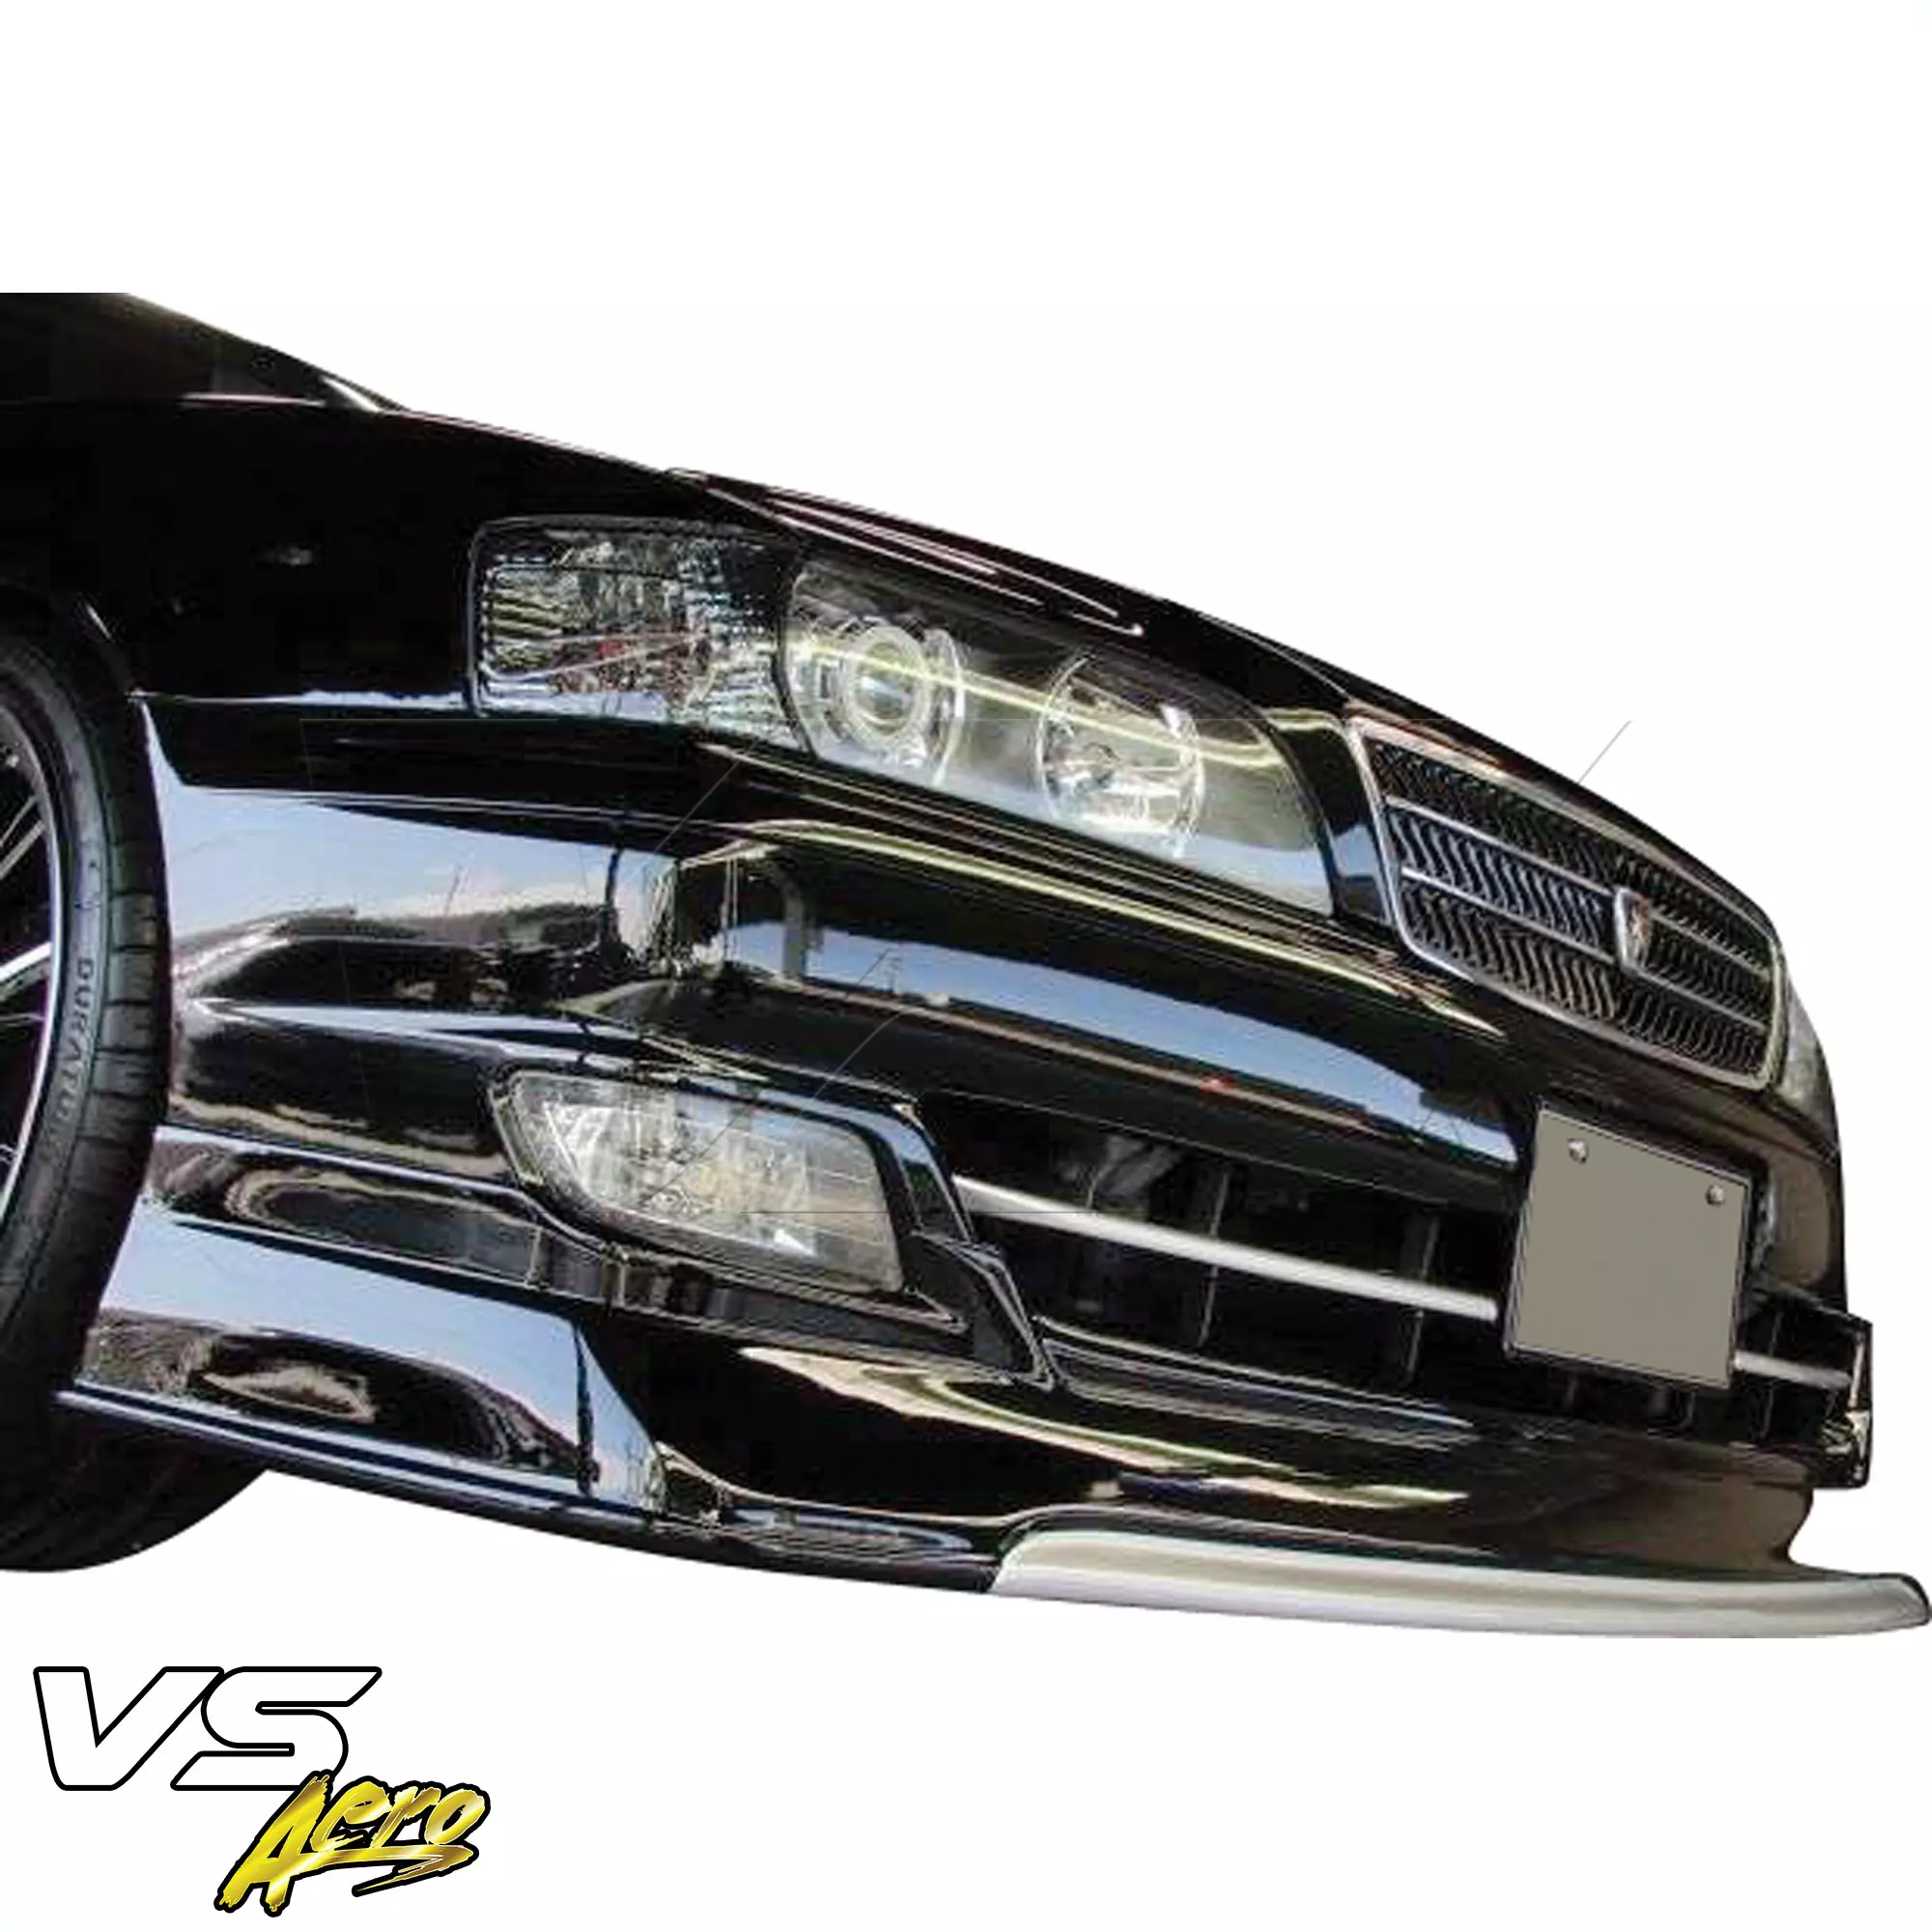 VSaero FRP TRAU Late Front Lip Valance > Toyota Chaser JZX100 1999-2000 - Image 17